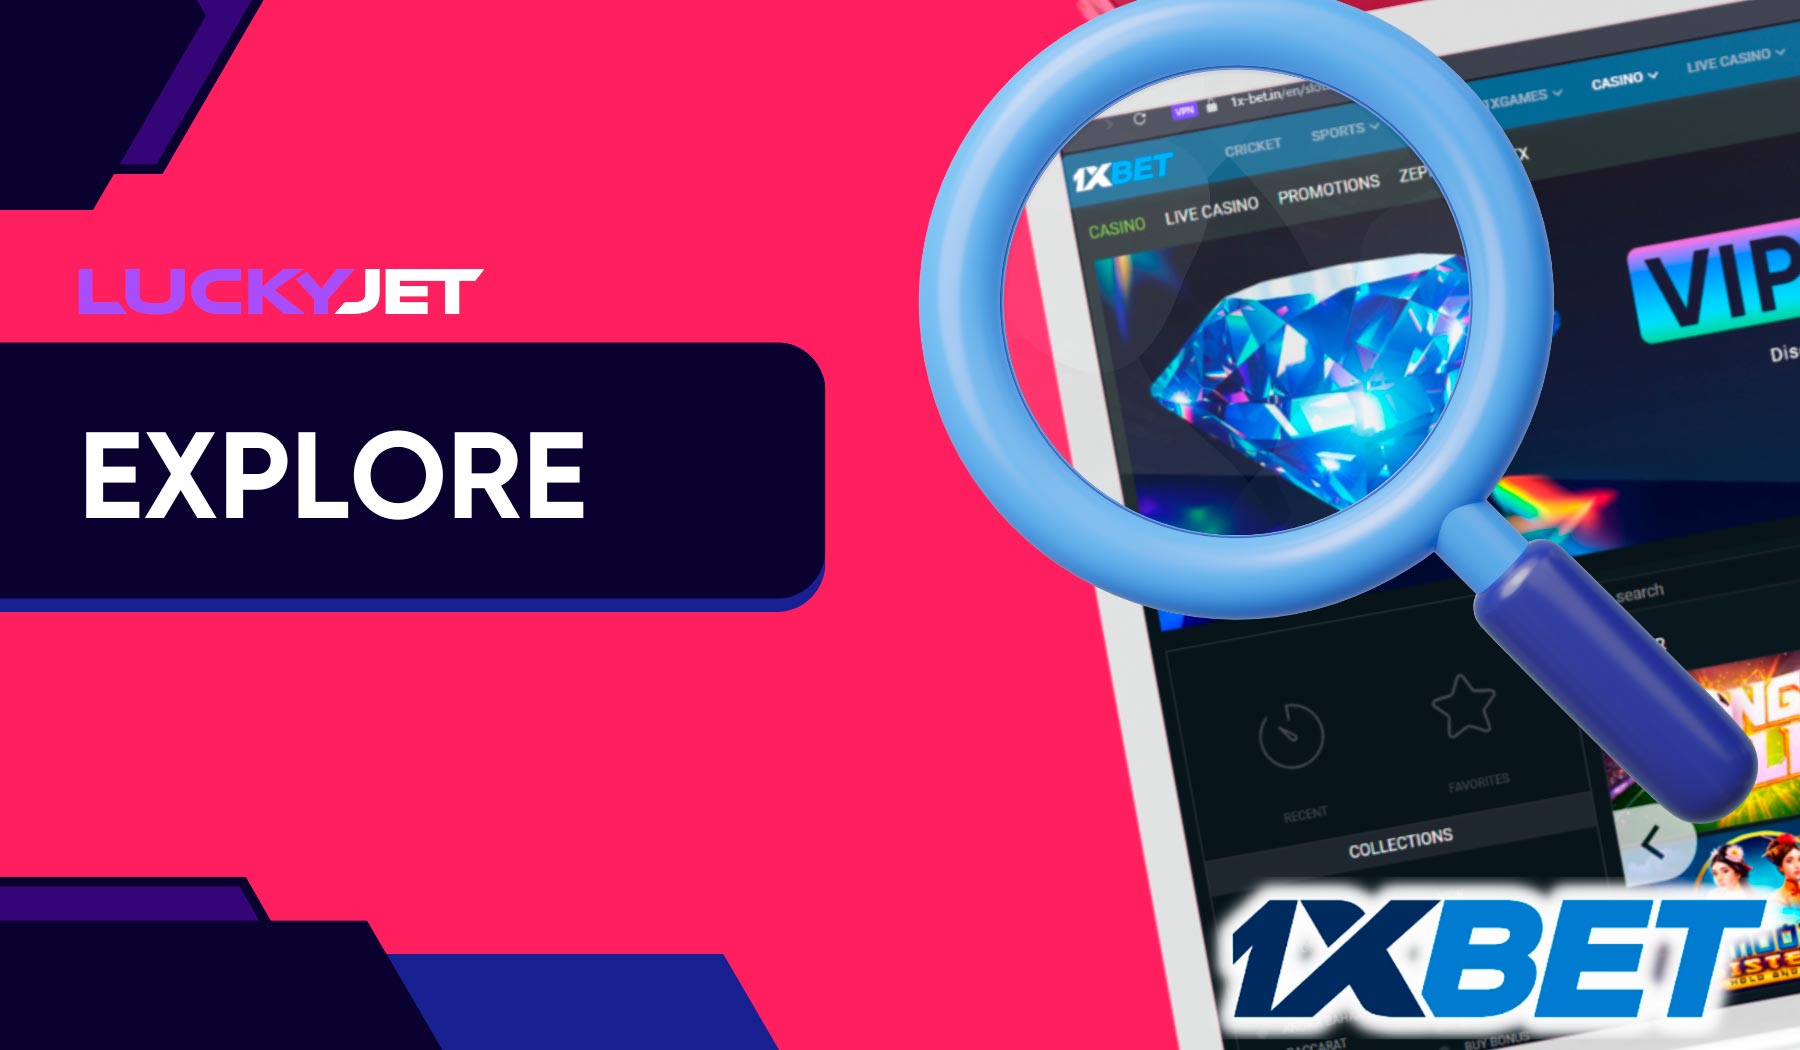 Lucky Jet presented by 1xbet offers gameplay